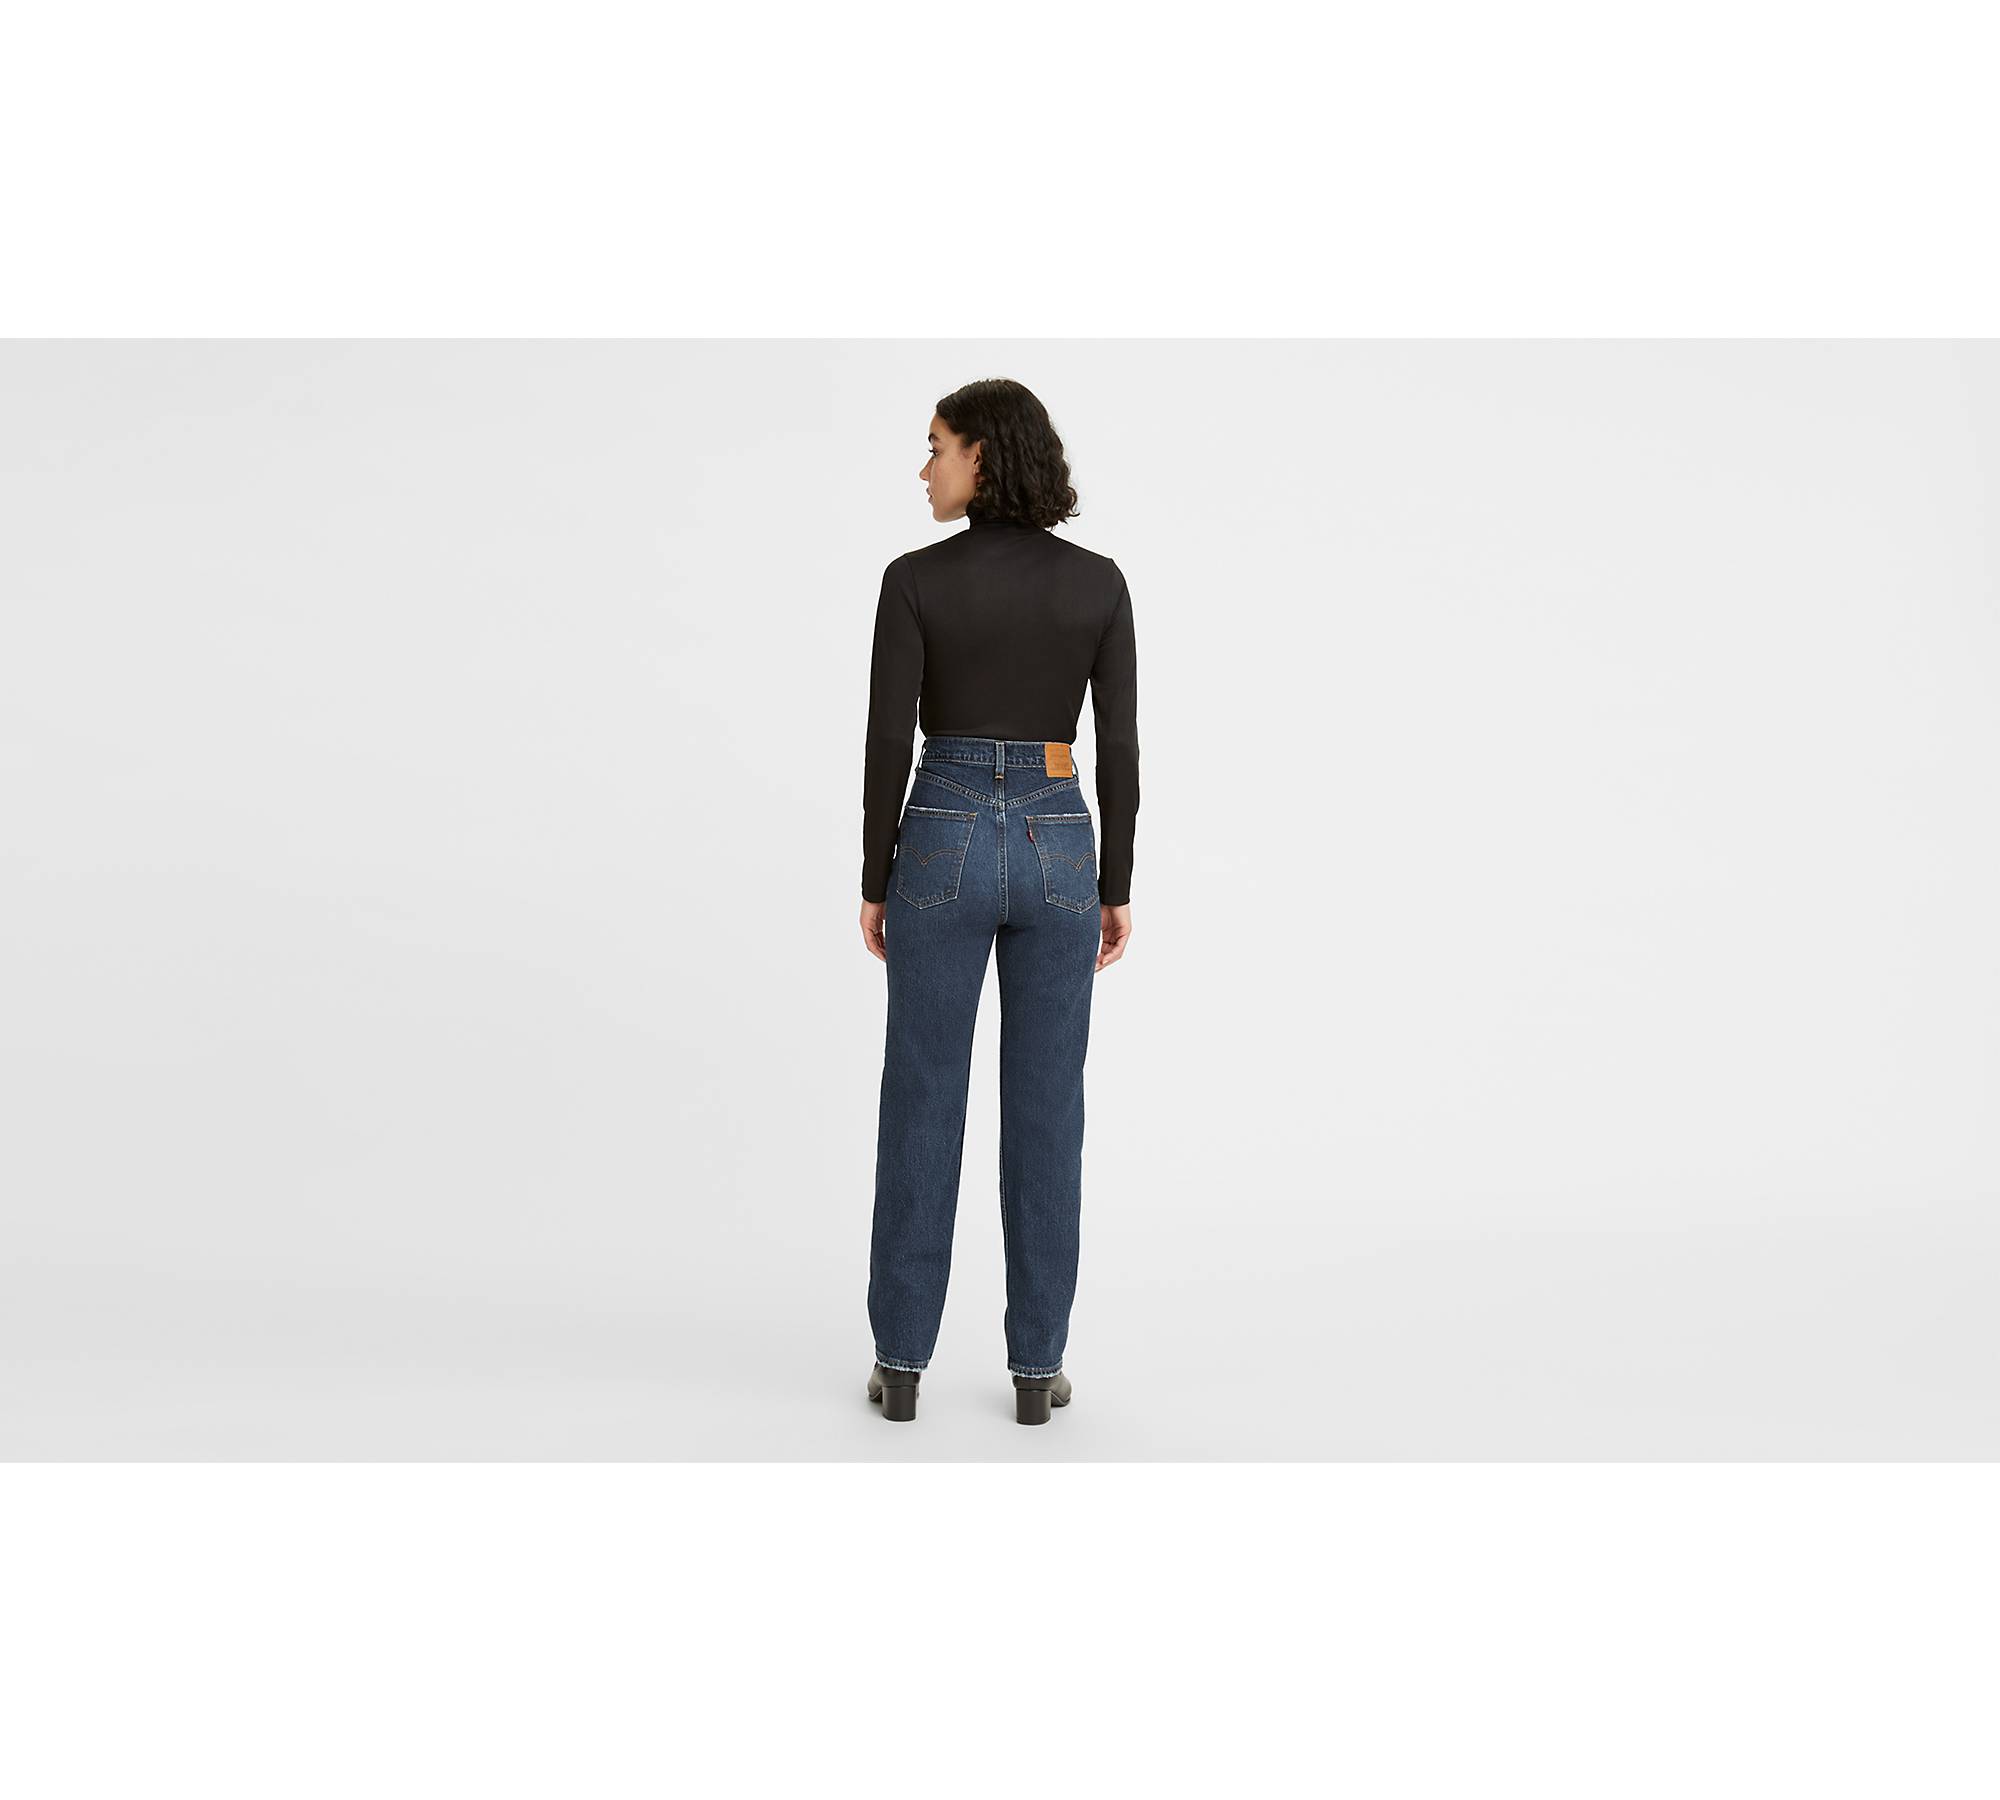 Signature by Levi Strauss & Co.™ Women's Shaping High-Rise Straight Jeans 